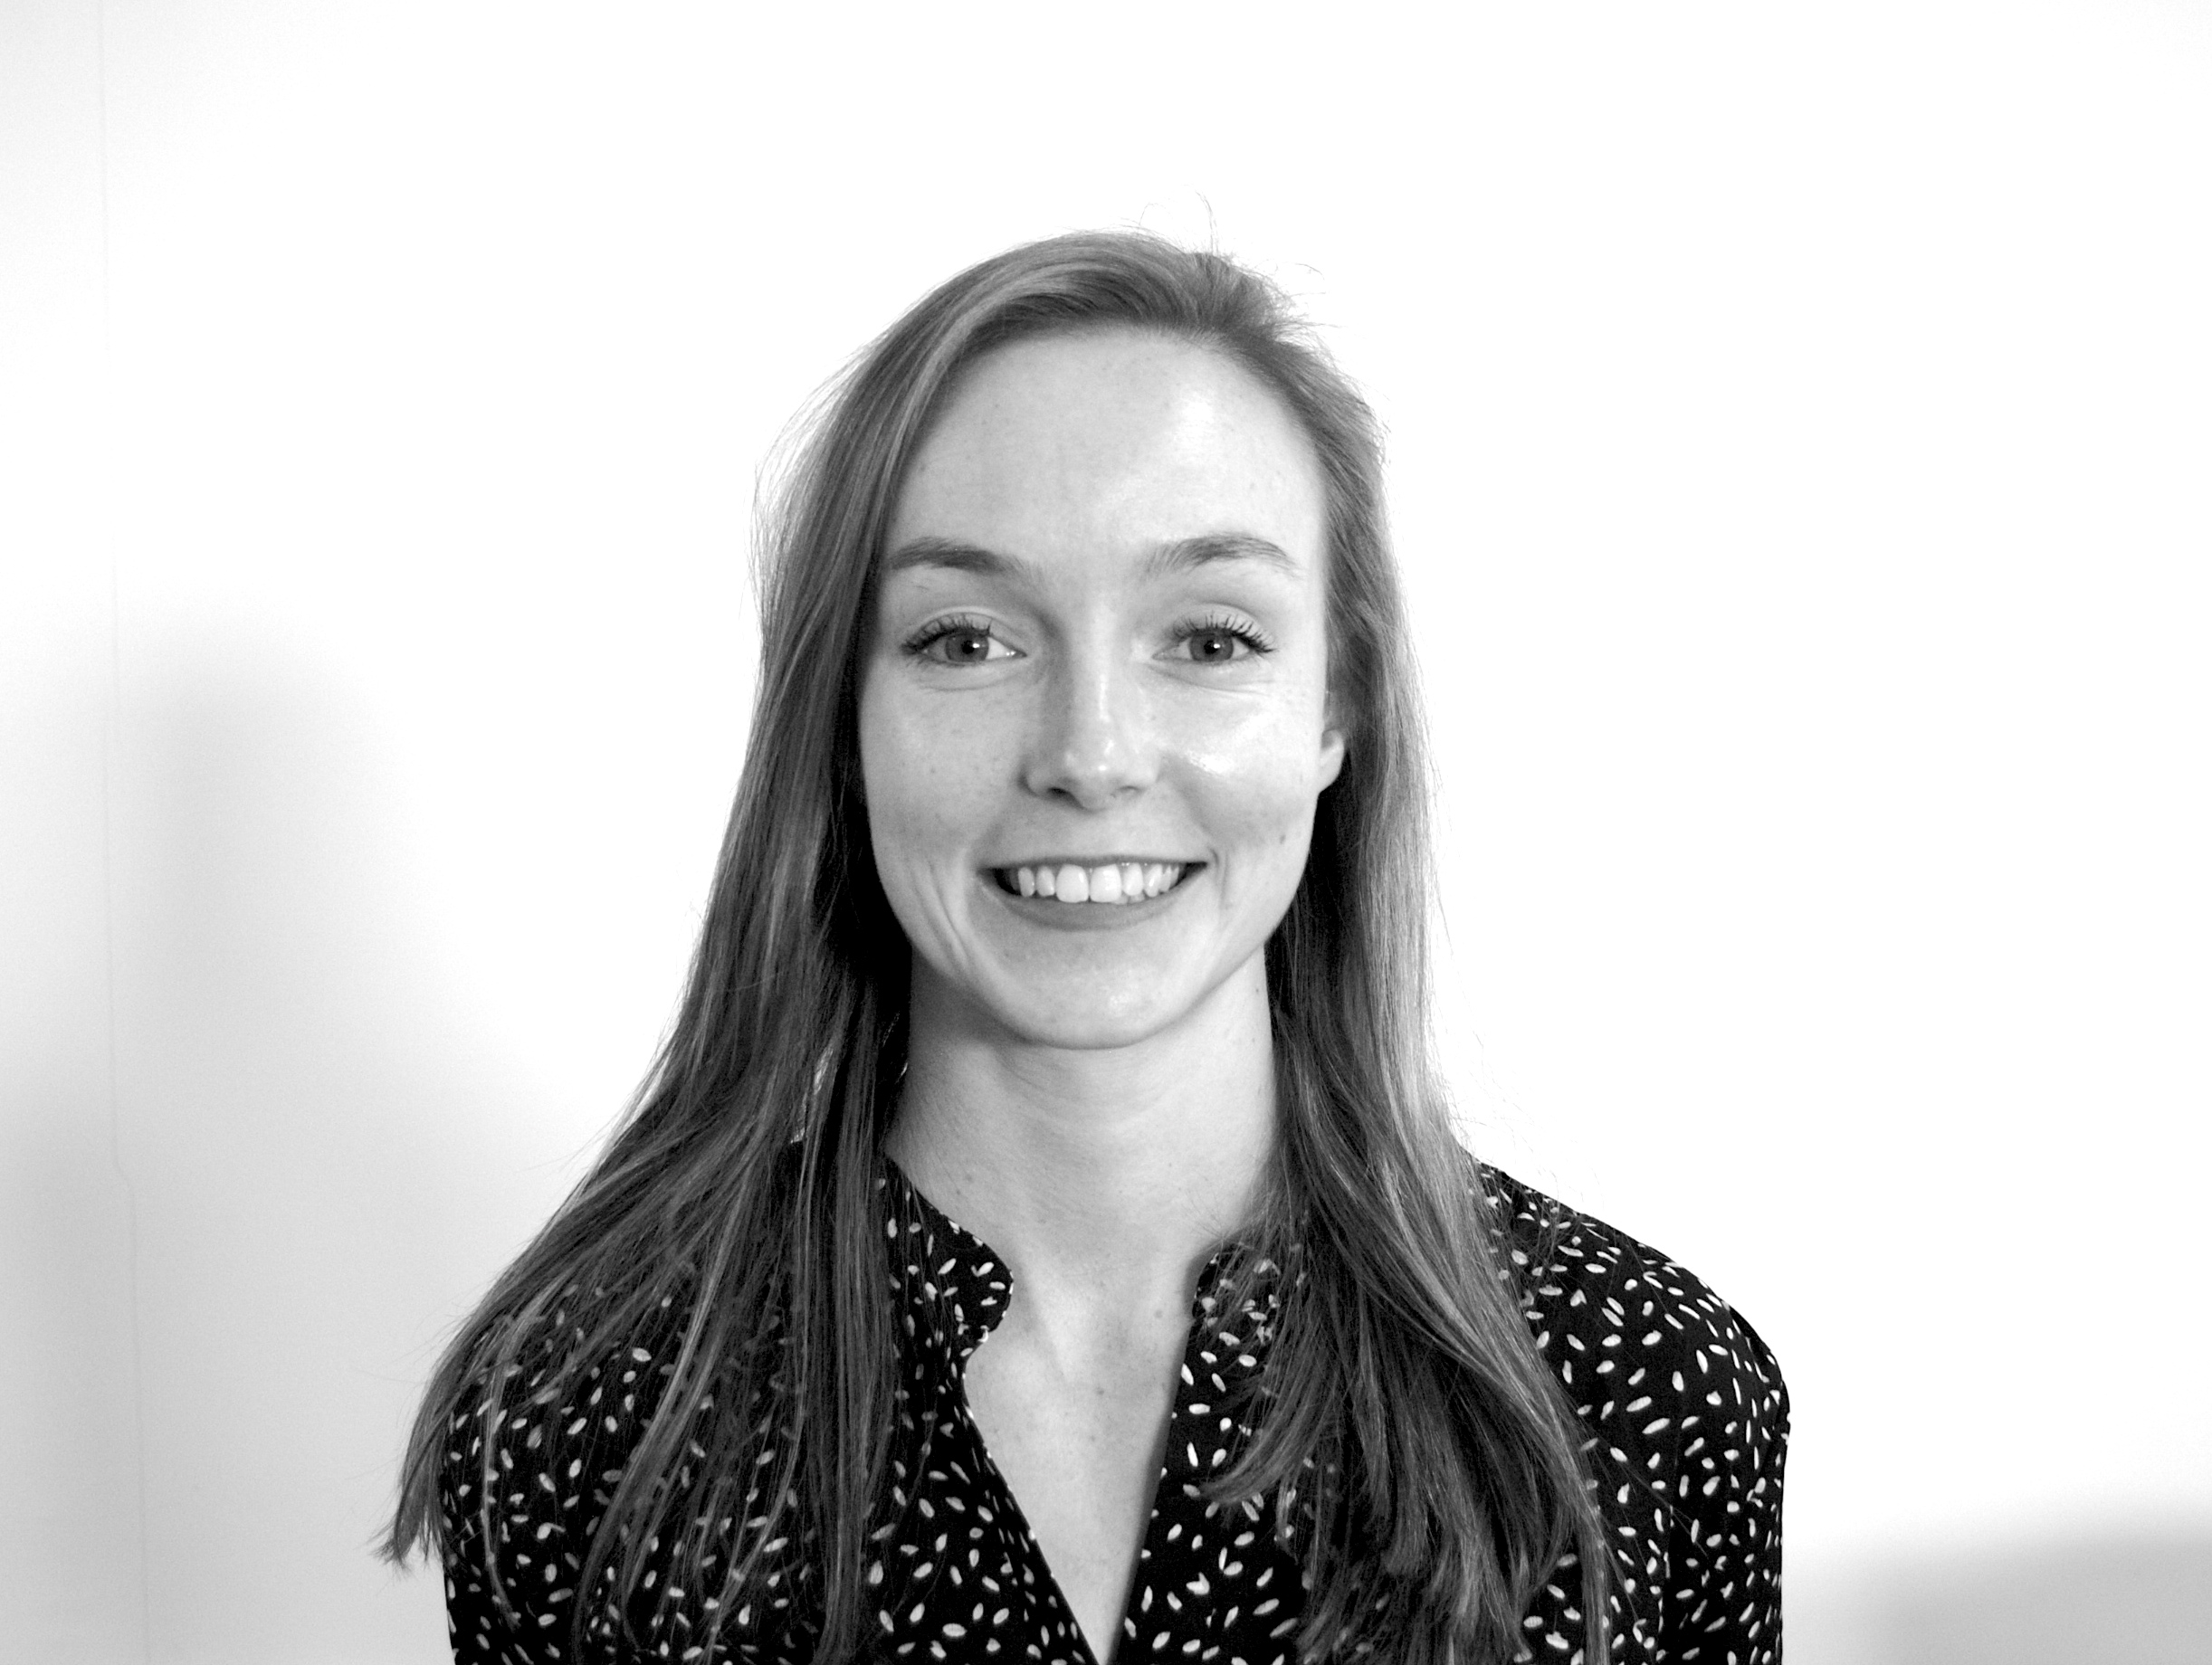 Emma Carter, Millennial & Innovative Marketer Joins the Colourwise Team ...